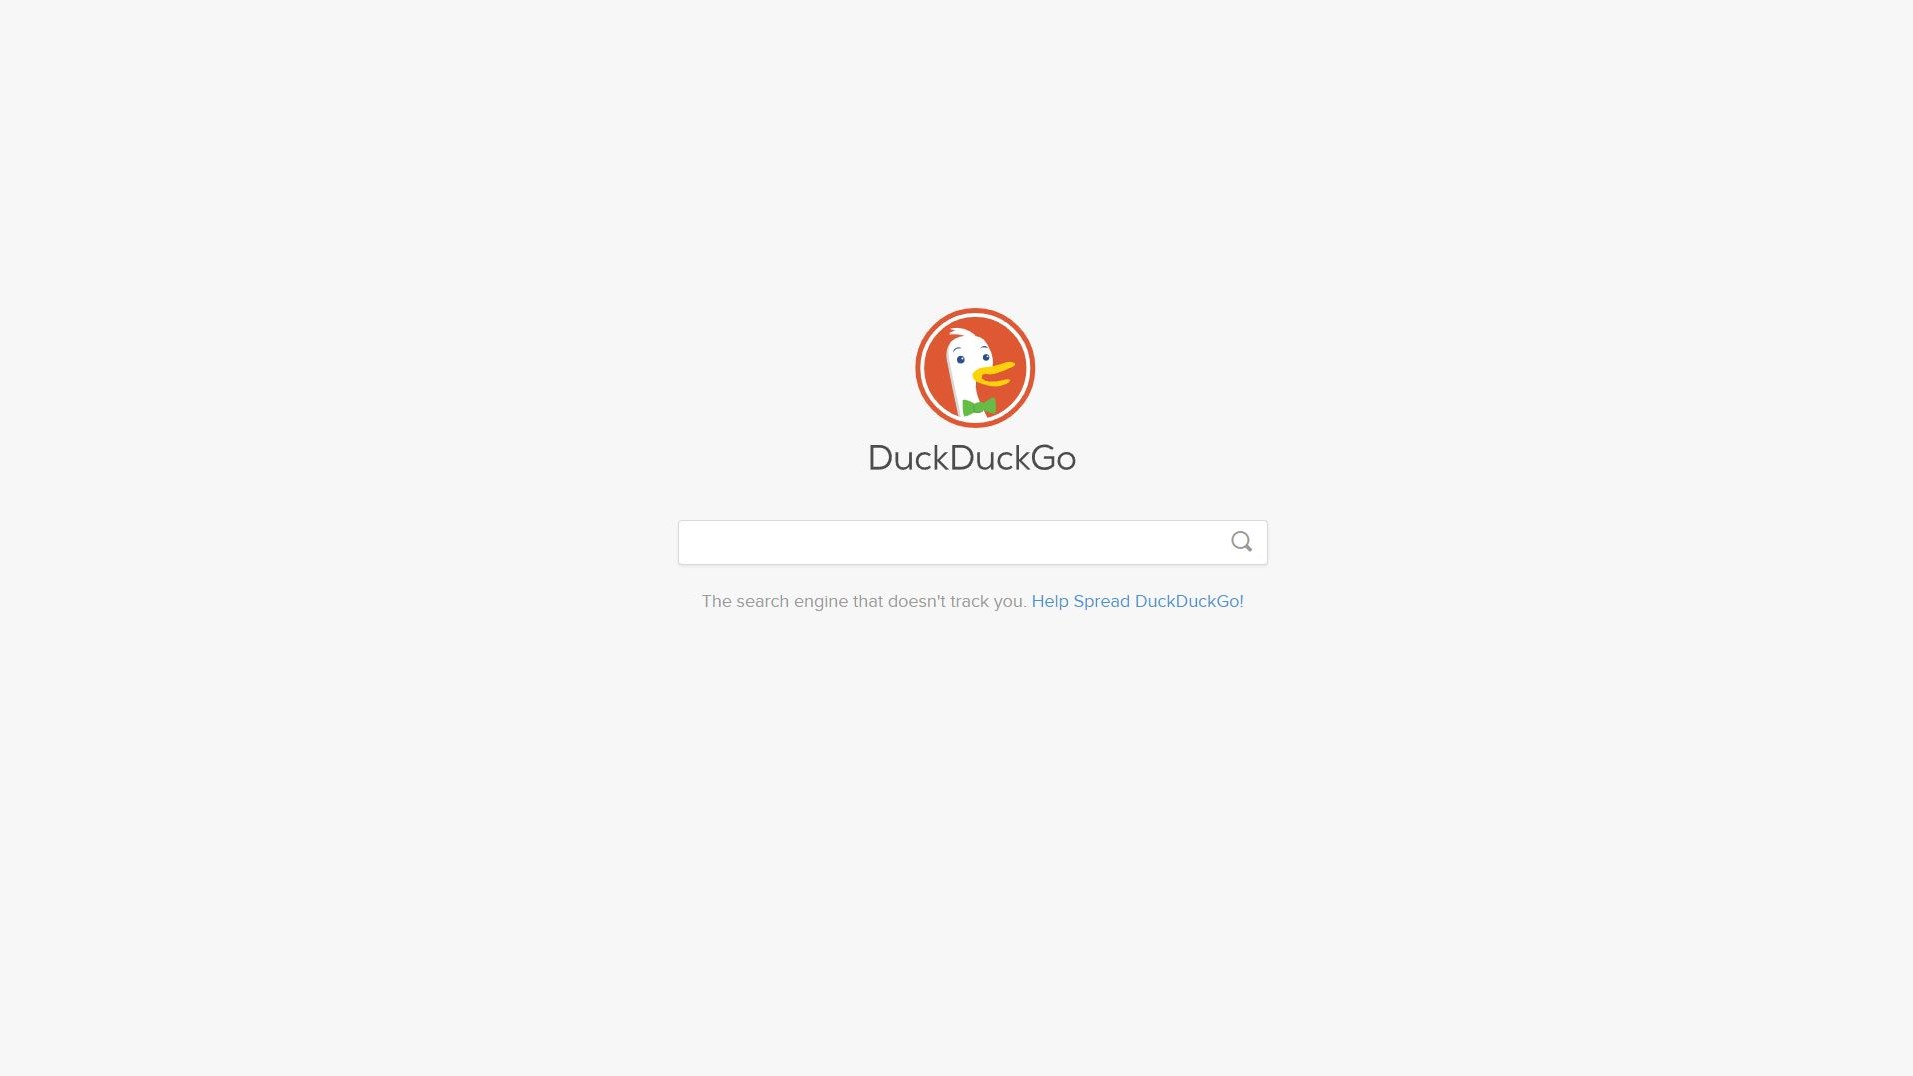 DuckDuckGo offers an all-in-one privacy package combining a VPN, identity theft protection and information removal